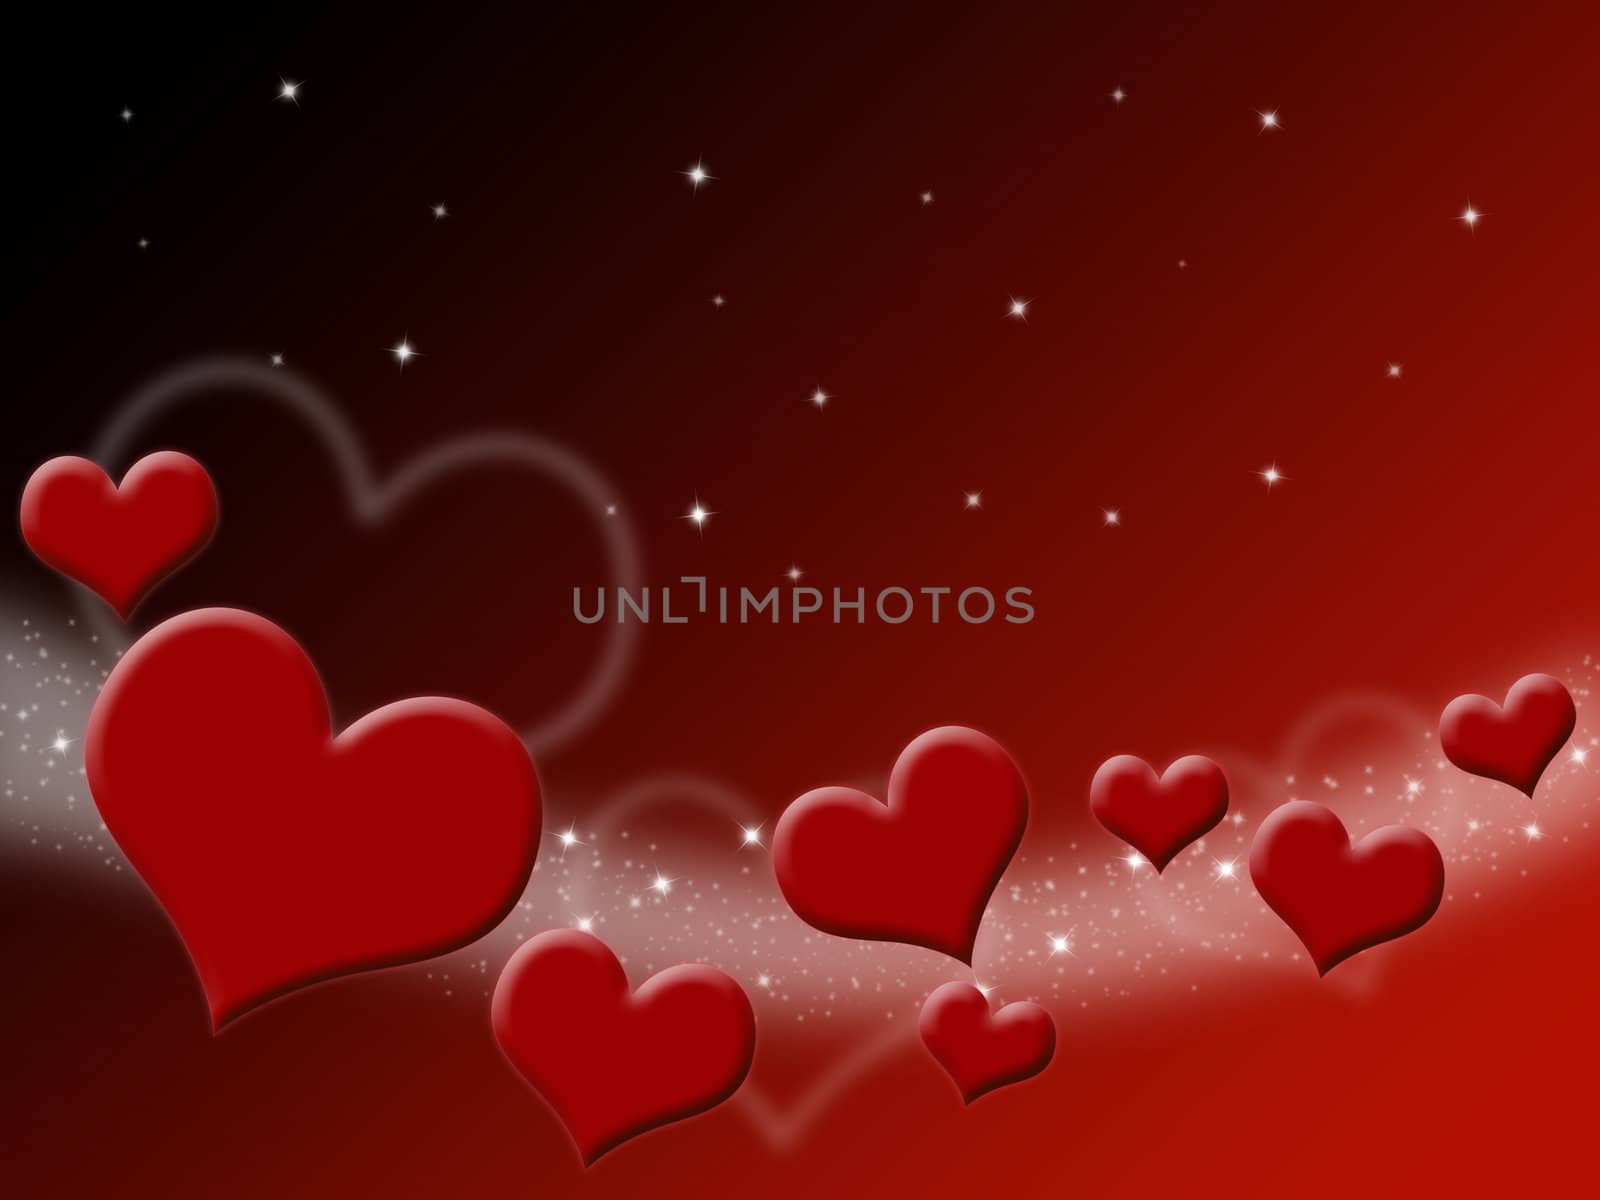 Valentines Day Card with red Hearts and stars on starry background
